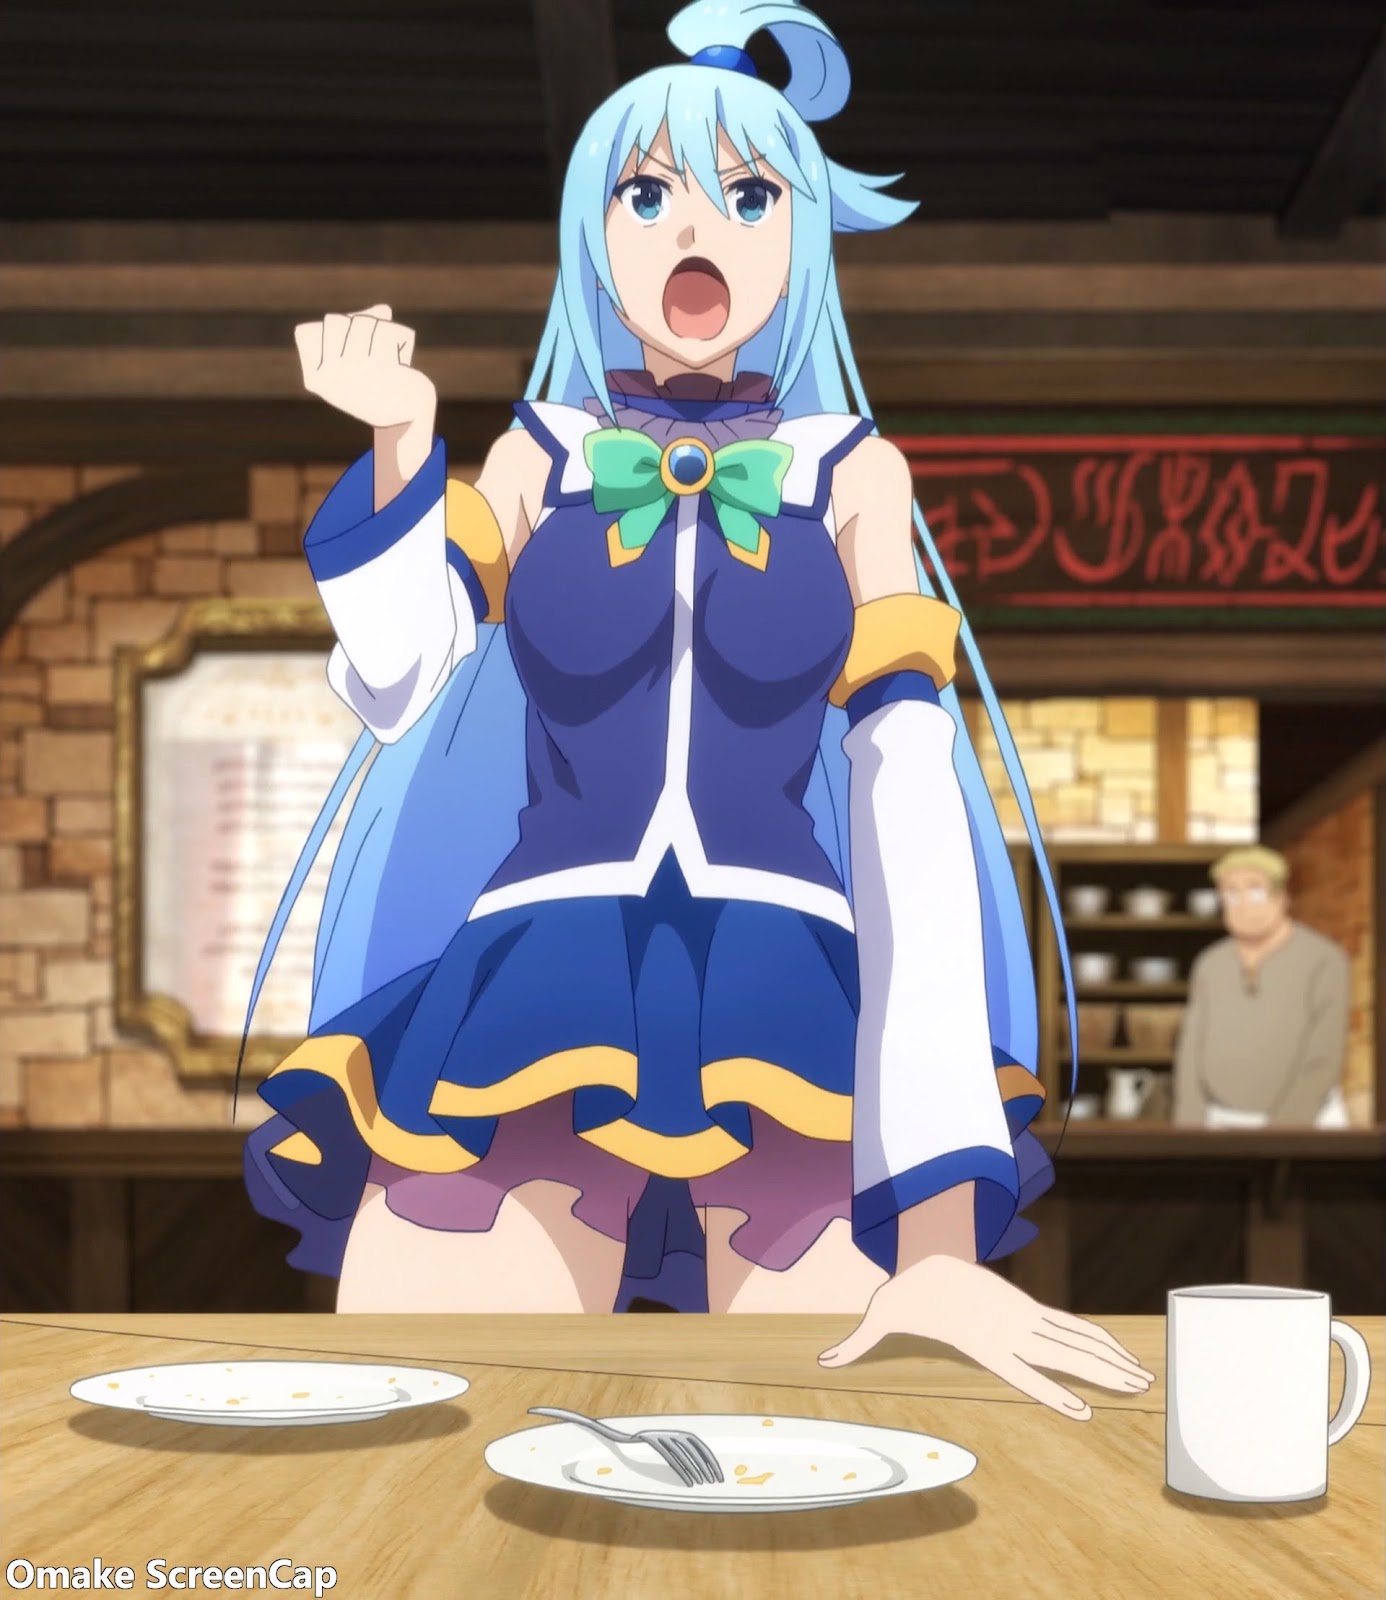 At breakfast, Aqua decided she had to do something about the town's dr...